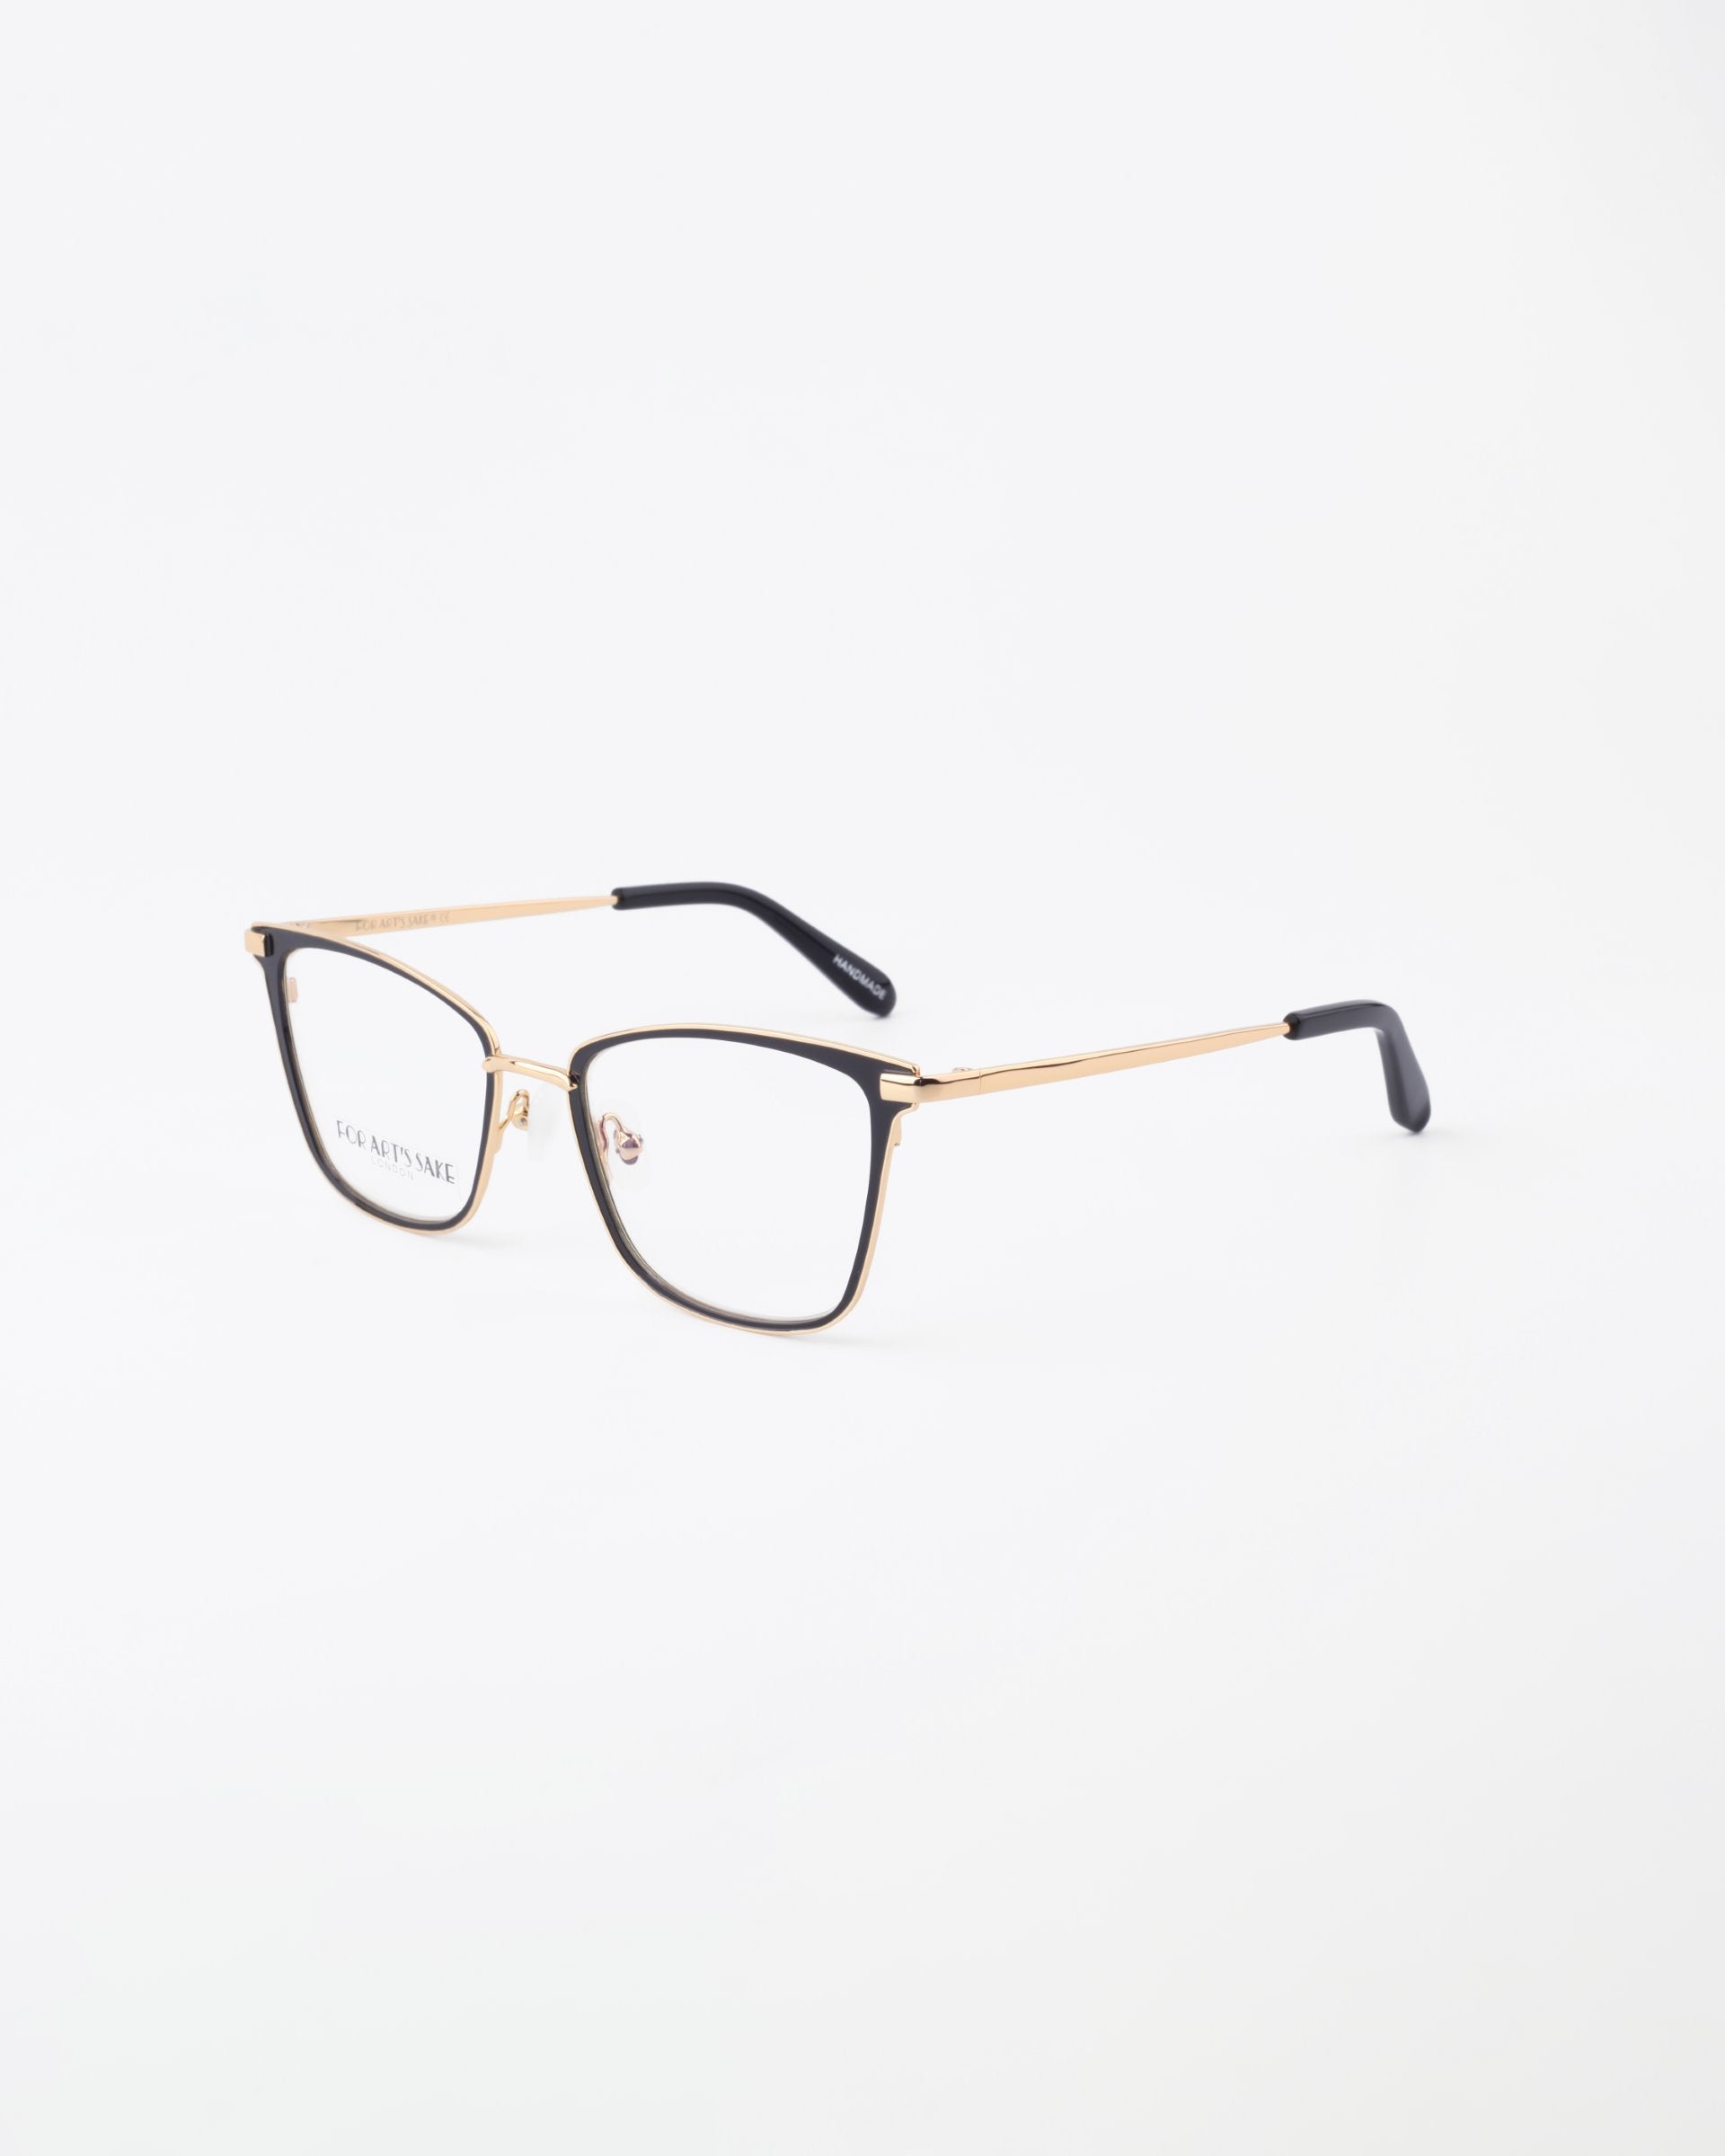 A pair of stylish For Art&#39;s Sake® Windsor eyeglasses with thin 18-karat gold-plated frames and black temple tips are set against a plain white background. The lenses, which feature a blue light filter, showcase the minimalist and elegant design of the eyewear.